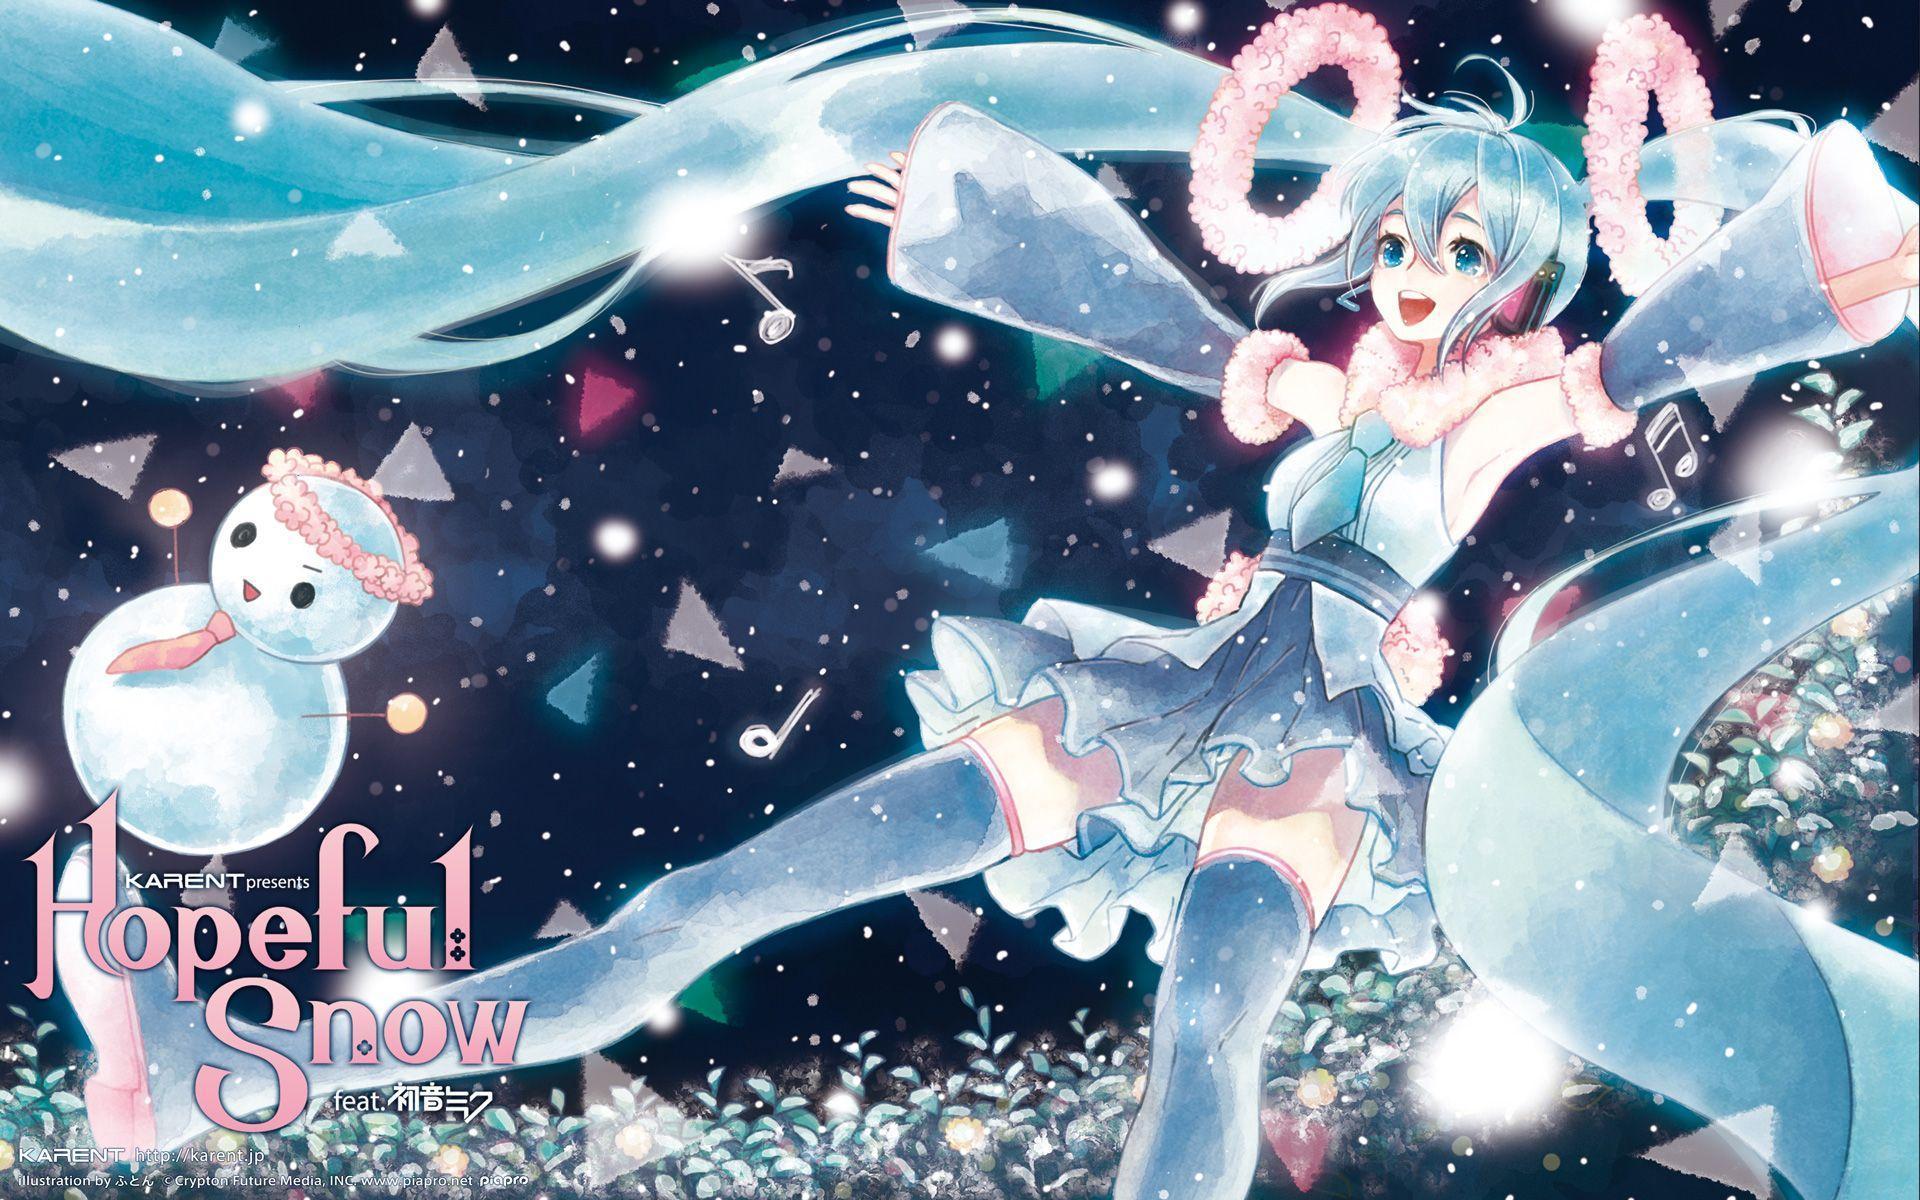 SNOW MIKU 2015 Wallpaper and CD Preview